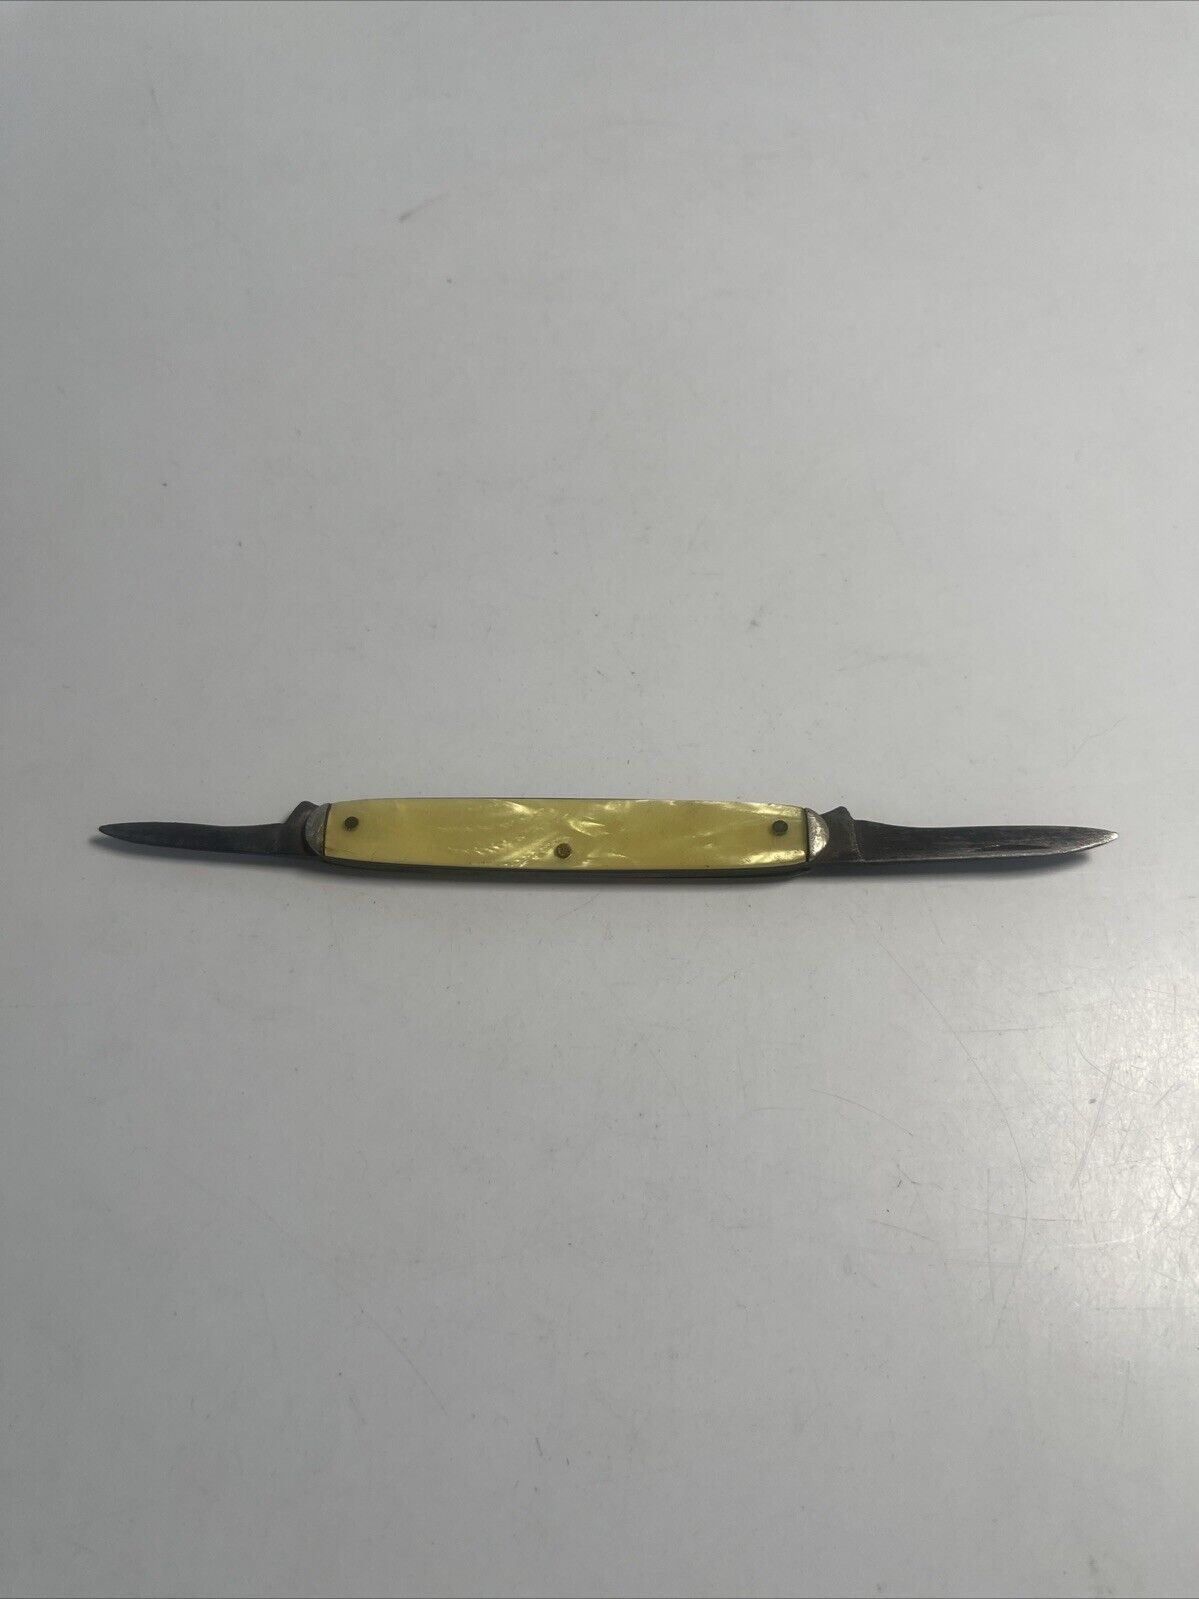 Vintage Camillus No. 42 Two Blade Pen Knife Yellow Handles New York